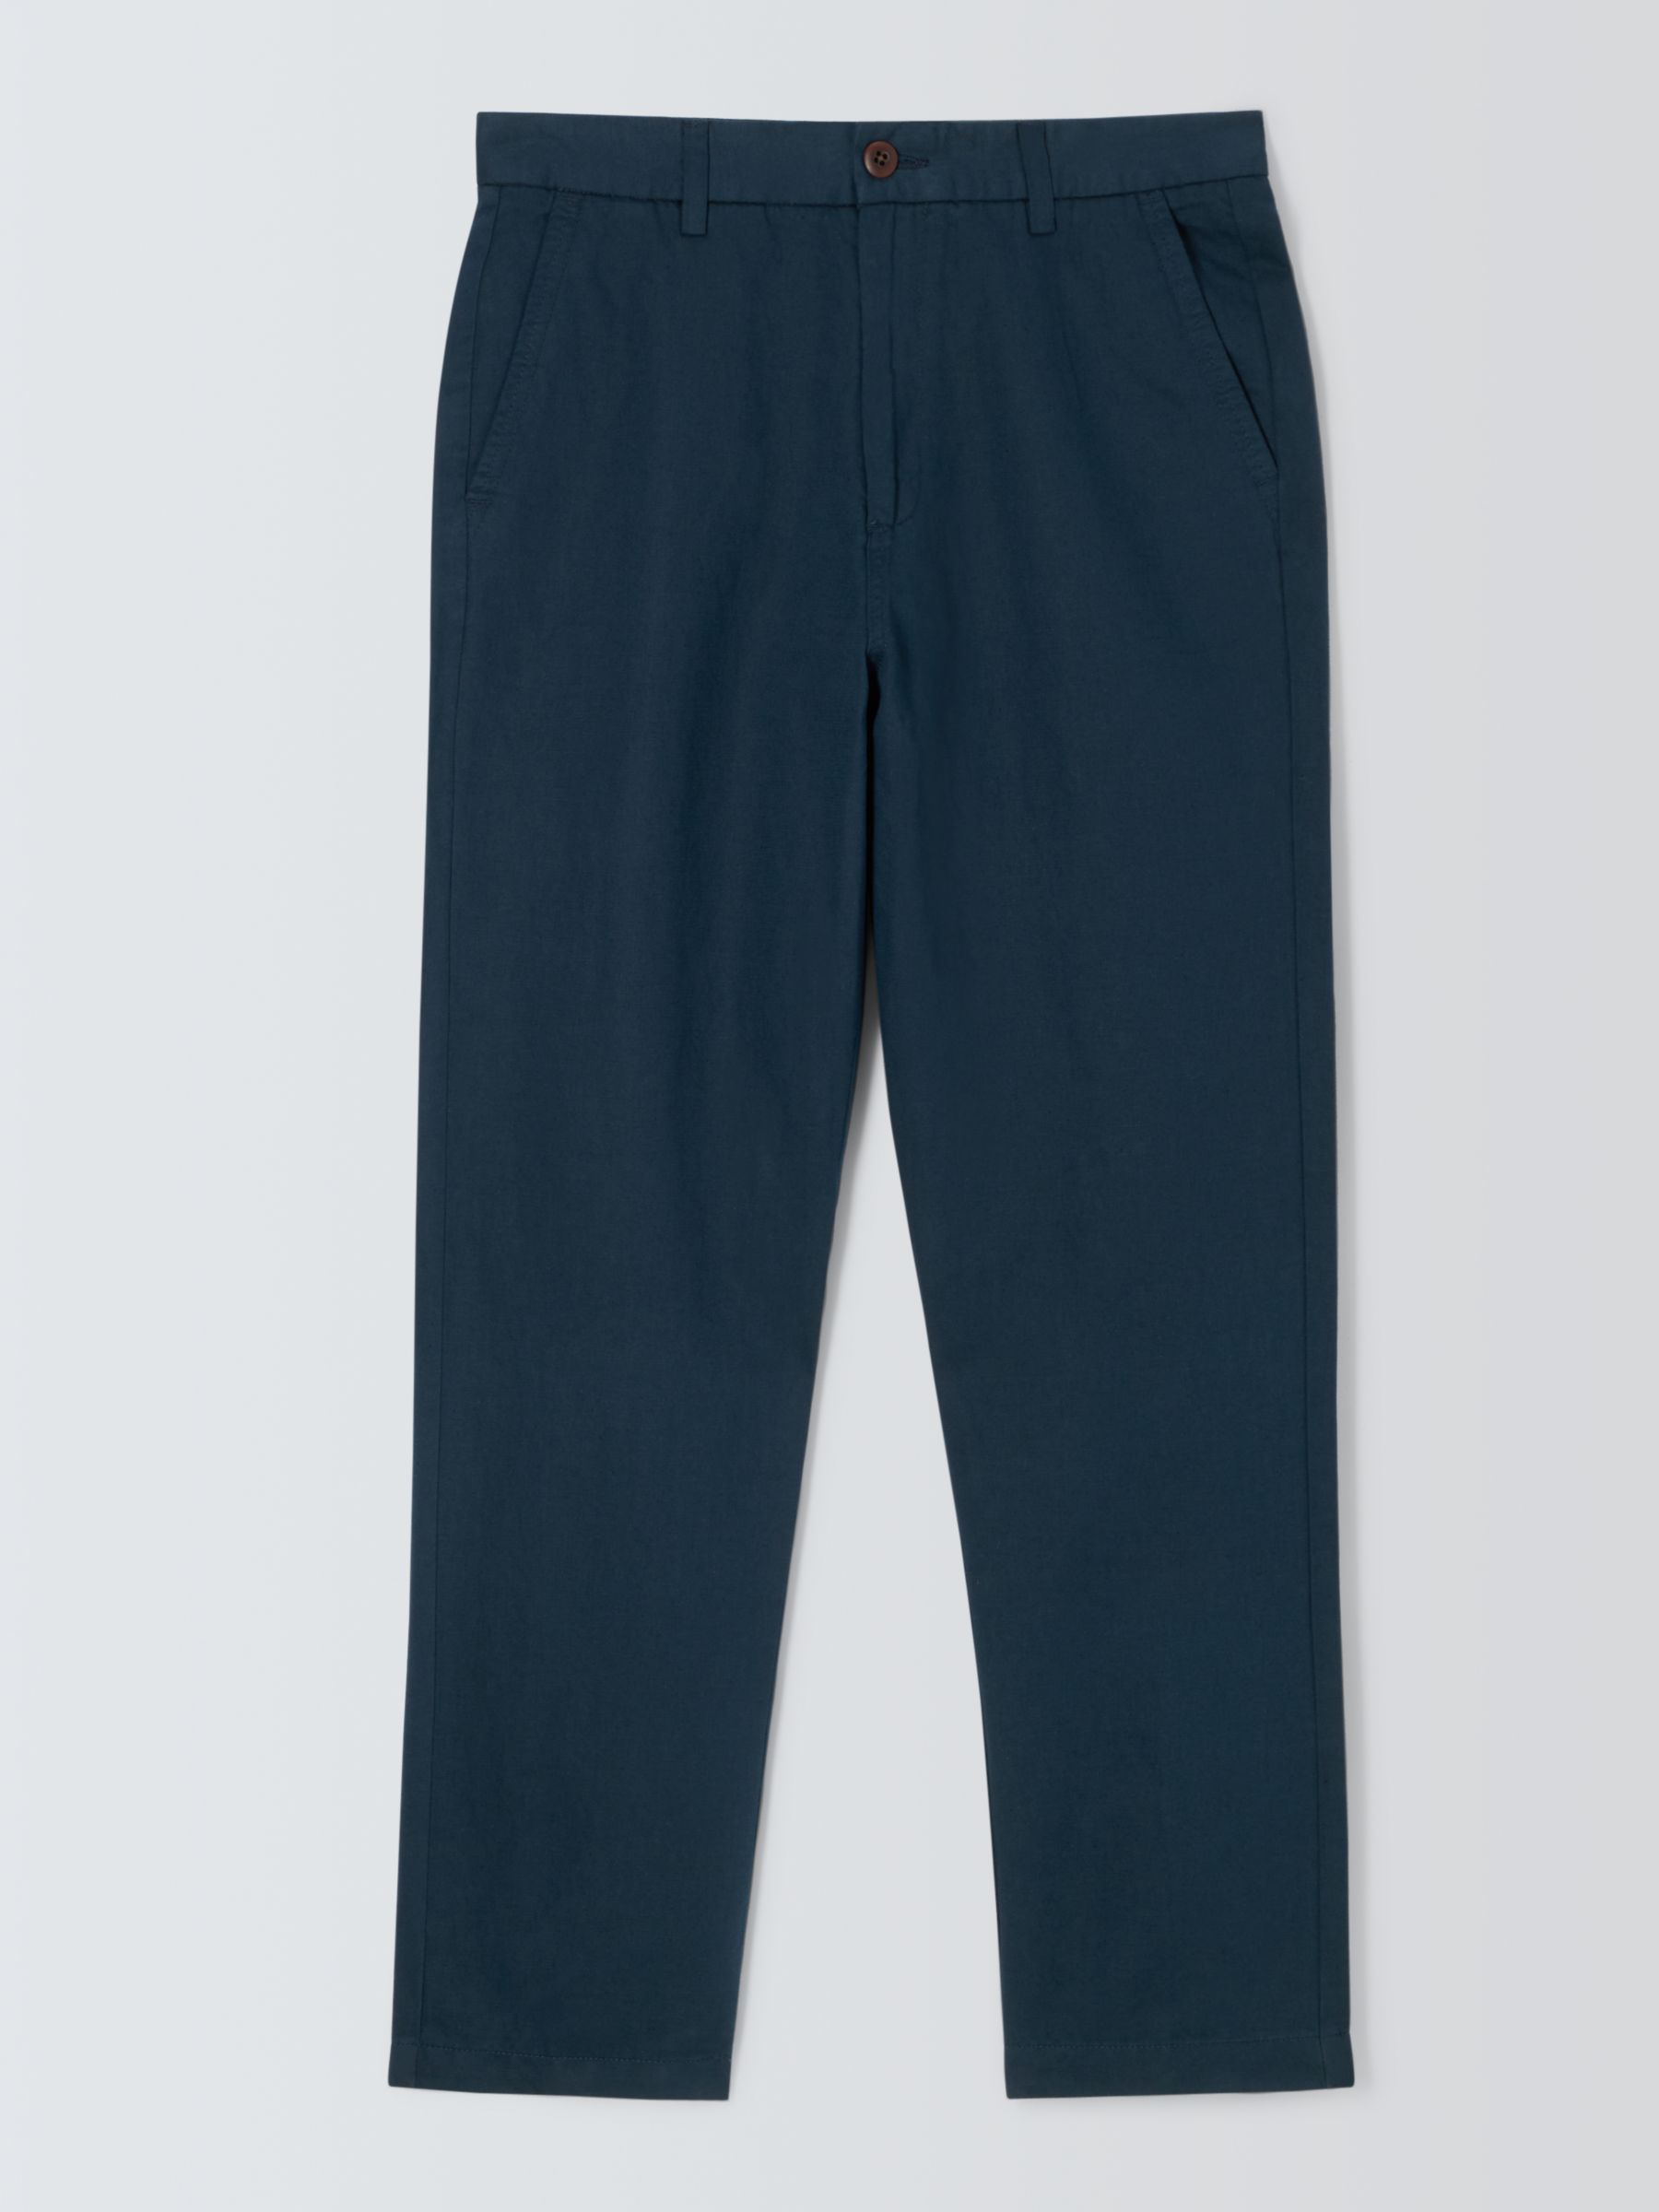 Buy John Lewis Straight Fit Cotton Linen Chinos Online at johnlewis.com